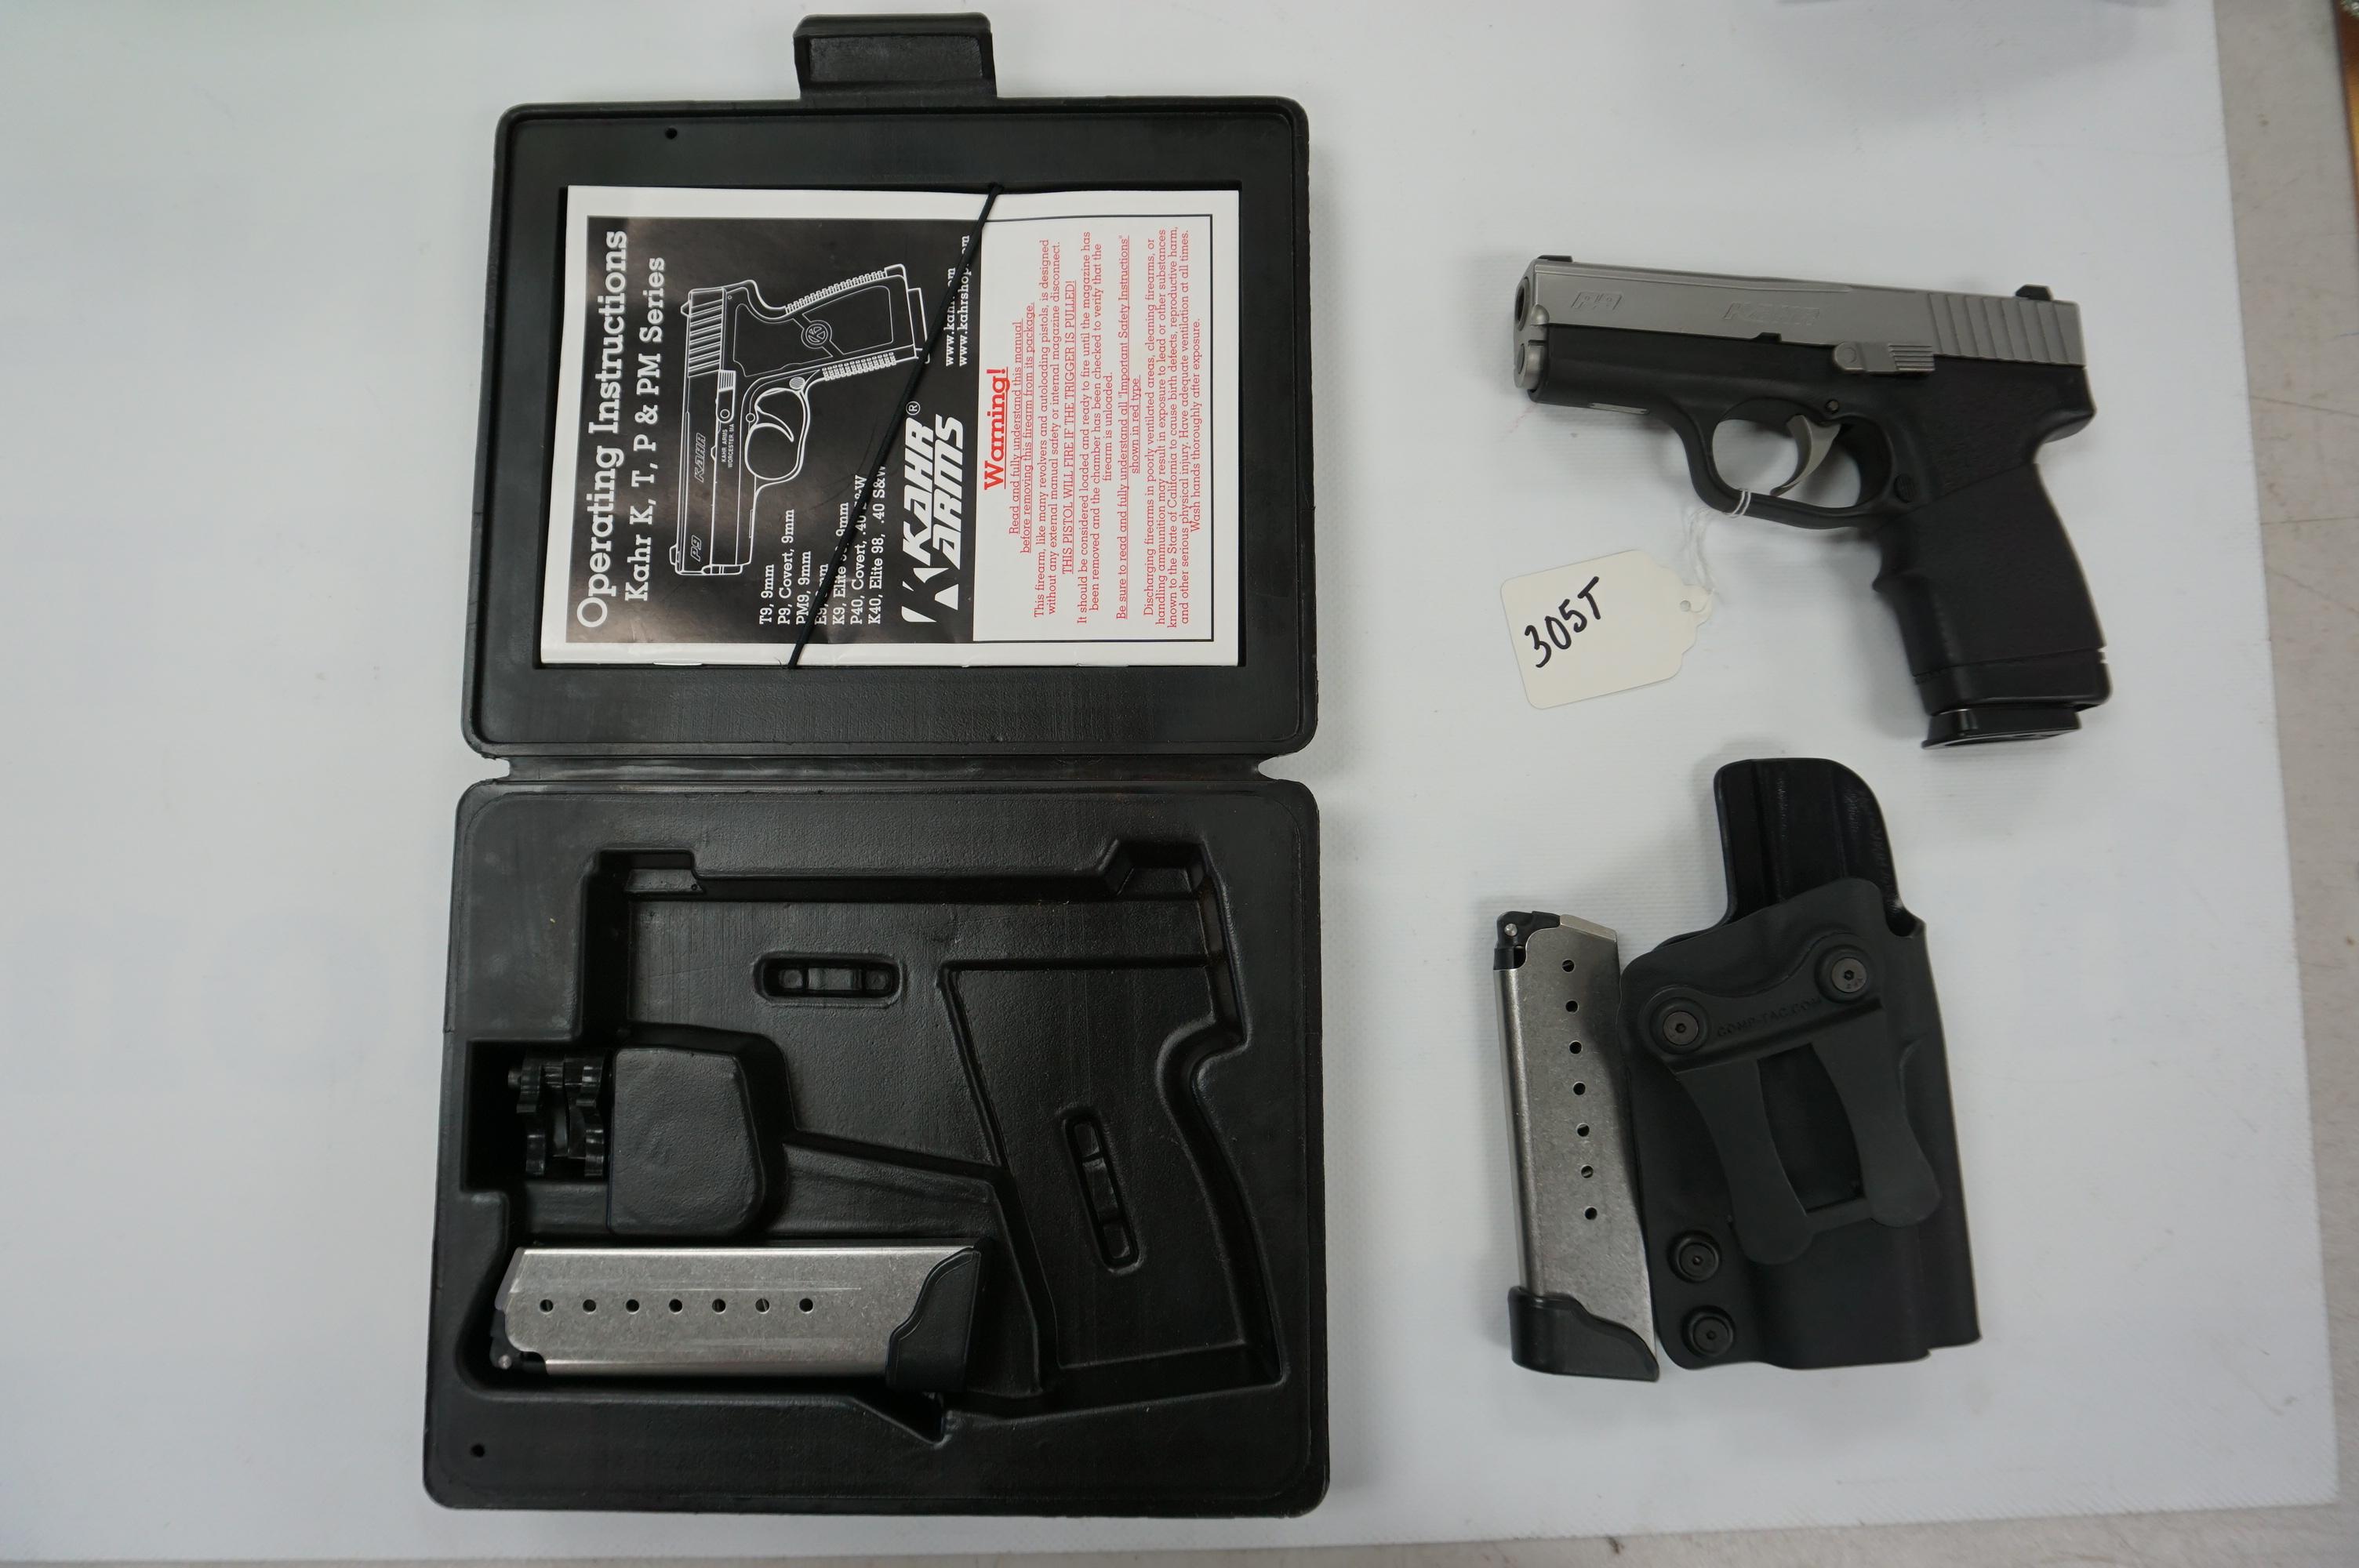 Estate Item: Used KAHR P9 with night sights, 3 magazines and Comp-Tac Holster, 9mm